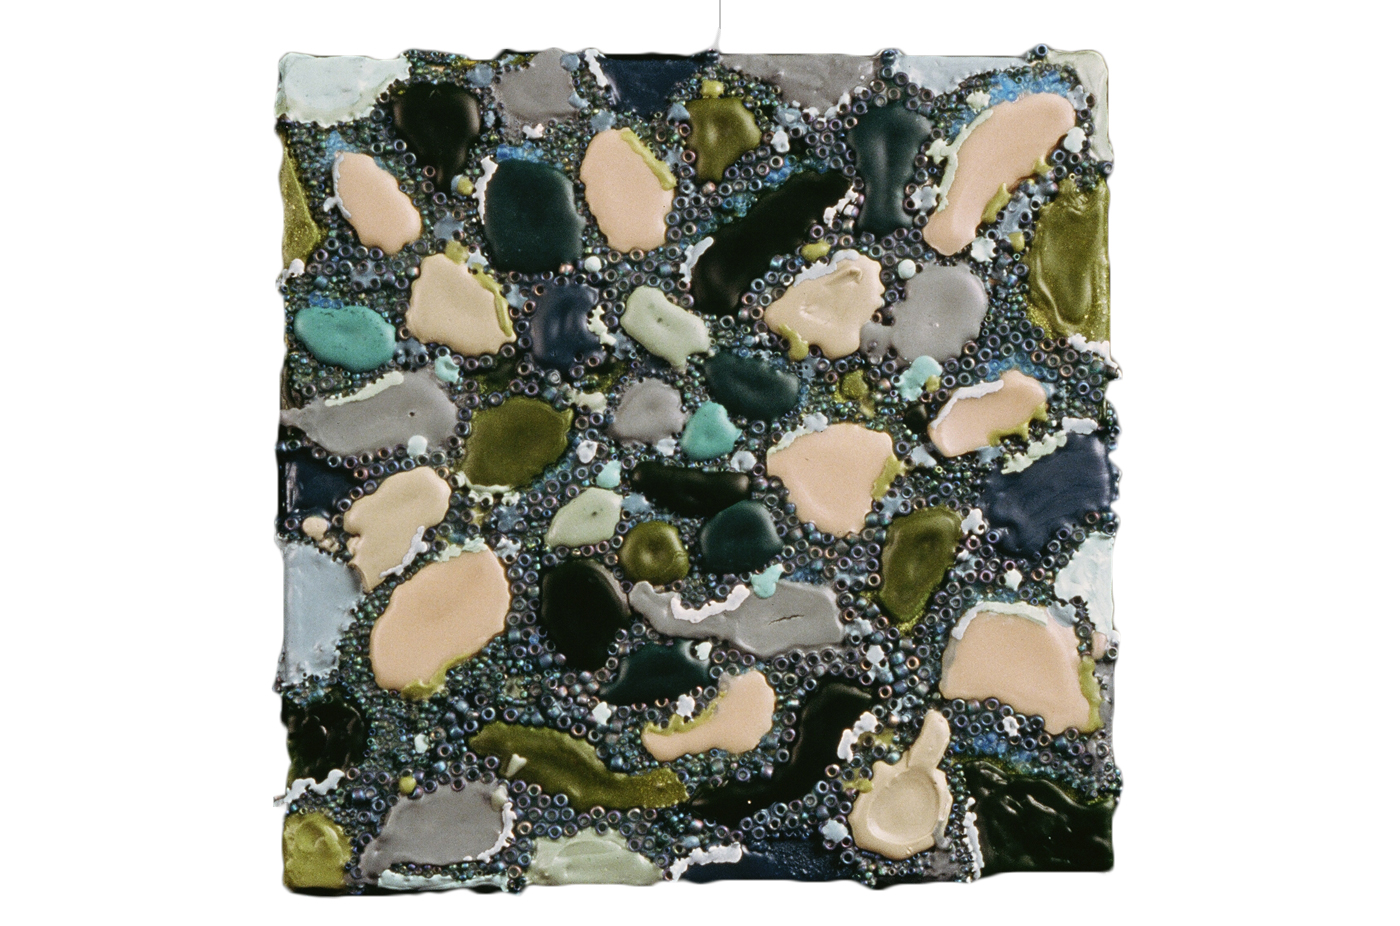 Chameleon, 1999, encaustic, beads, and urethane on canvas, 8 x 8 inches